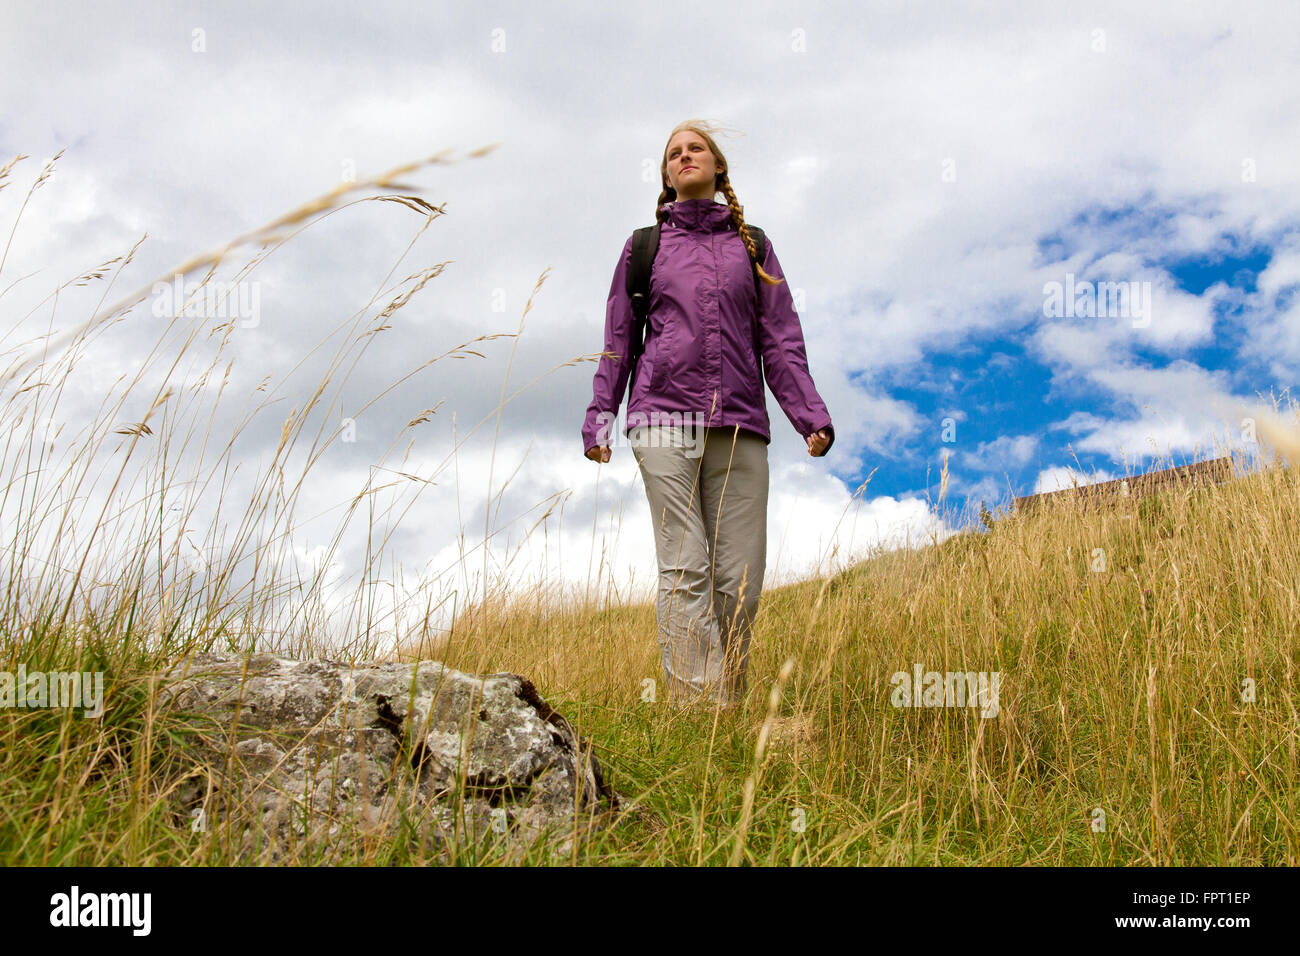 Young woman hiking in nature Stock Photo